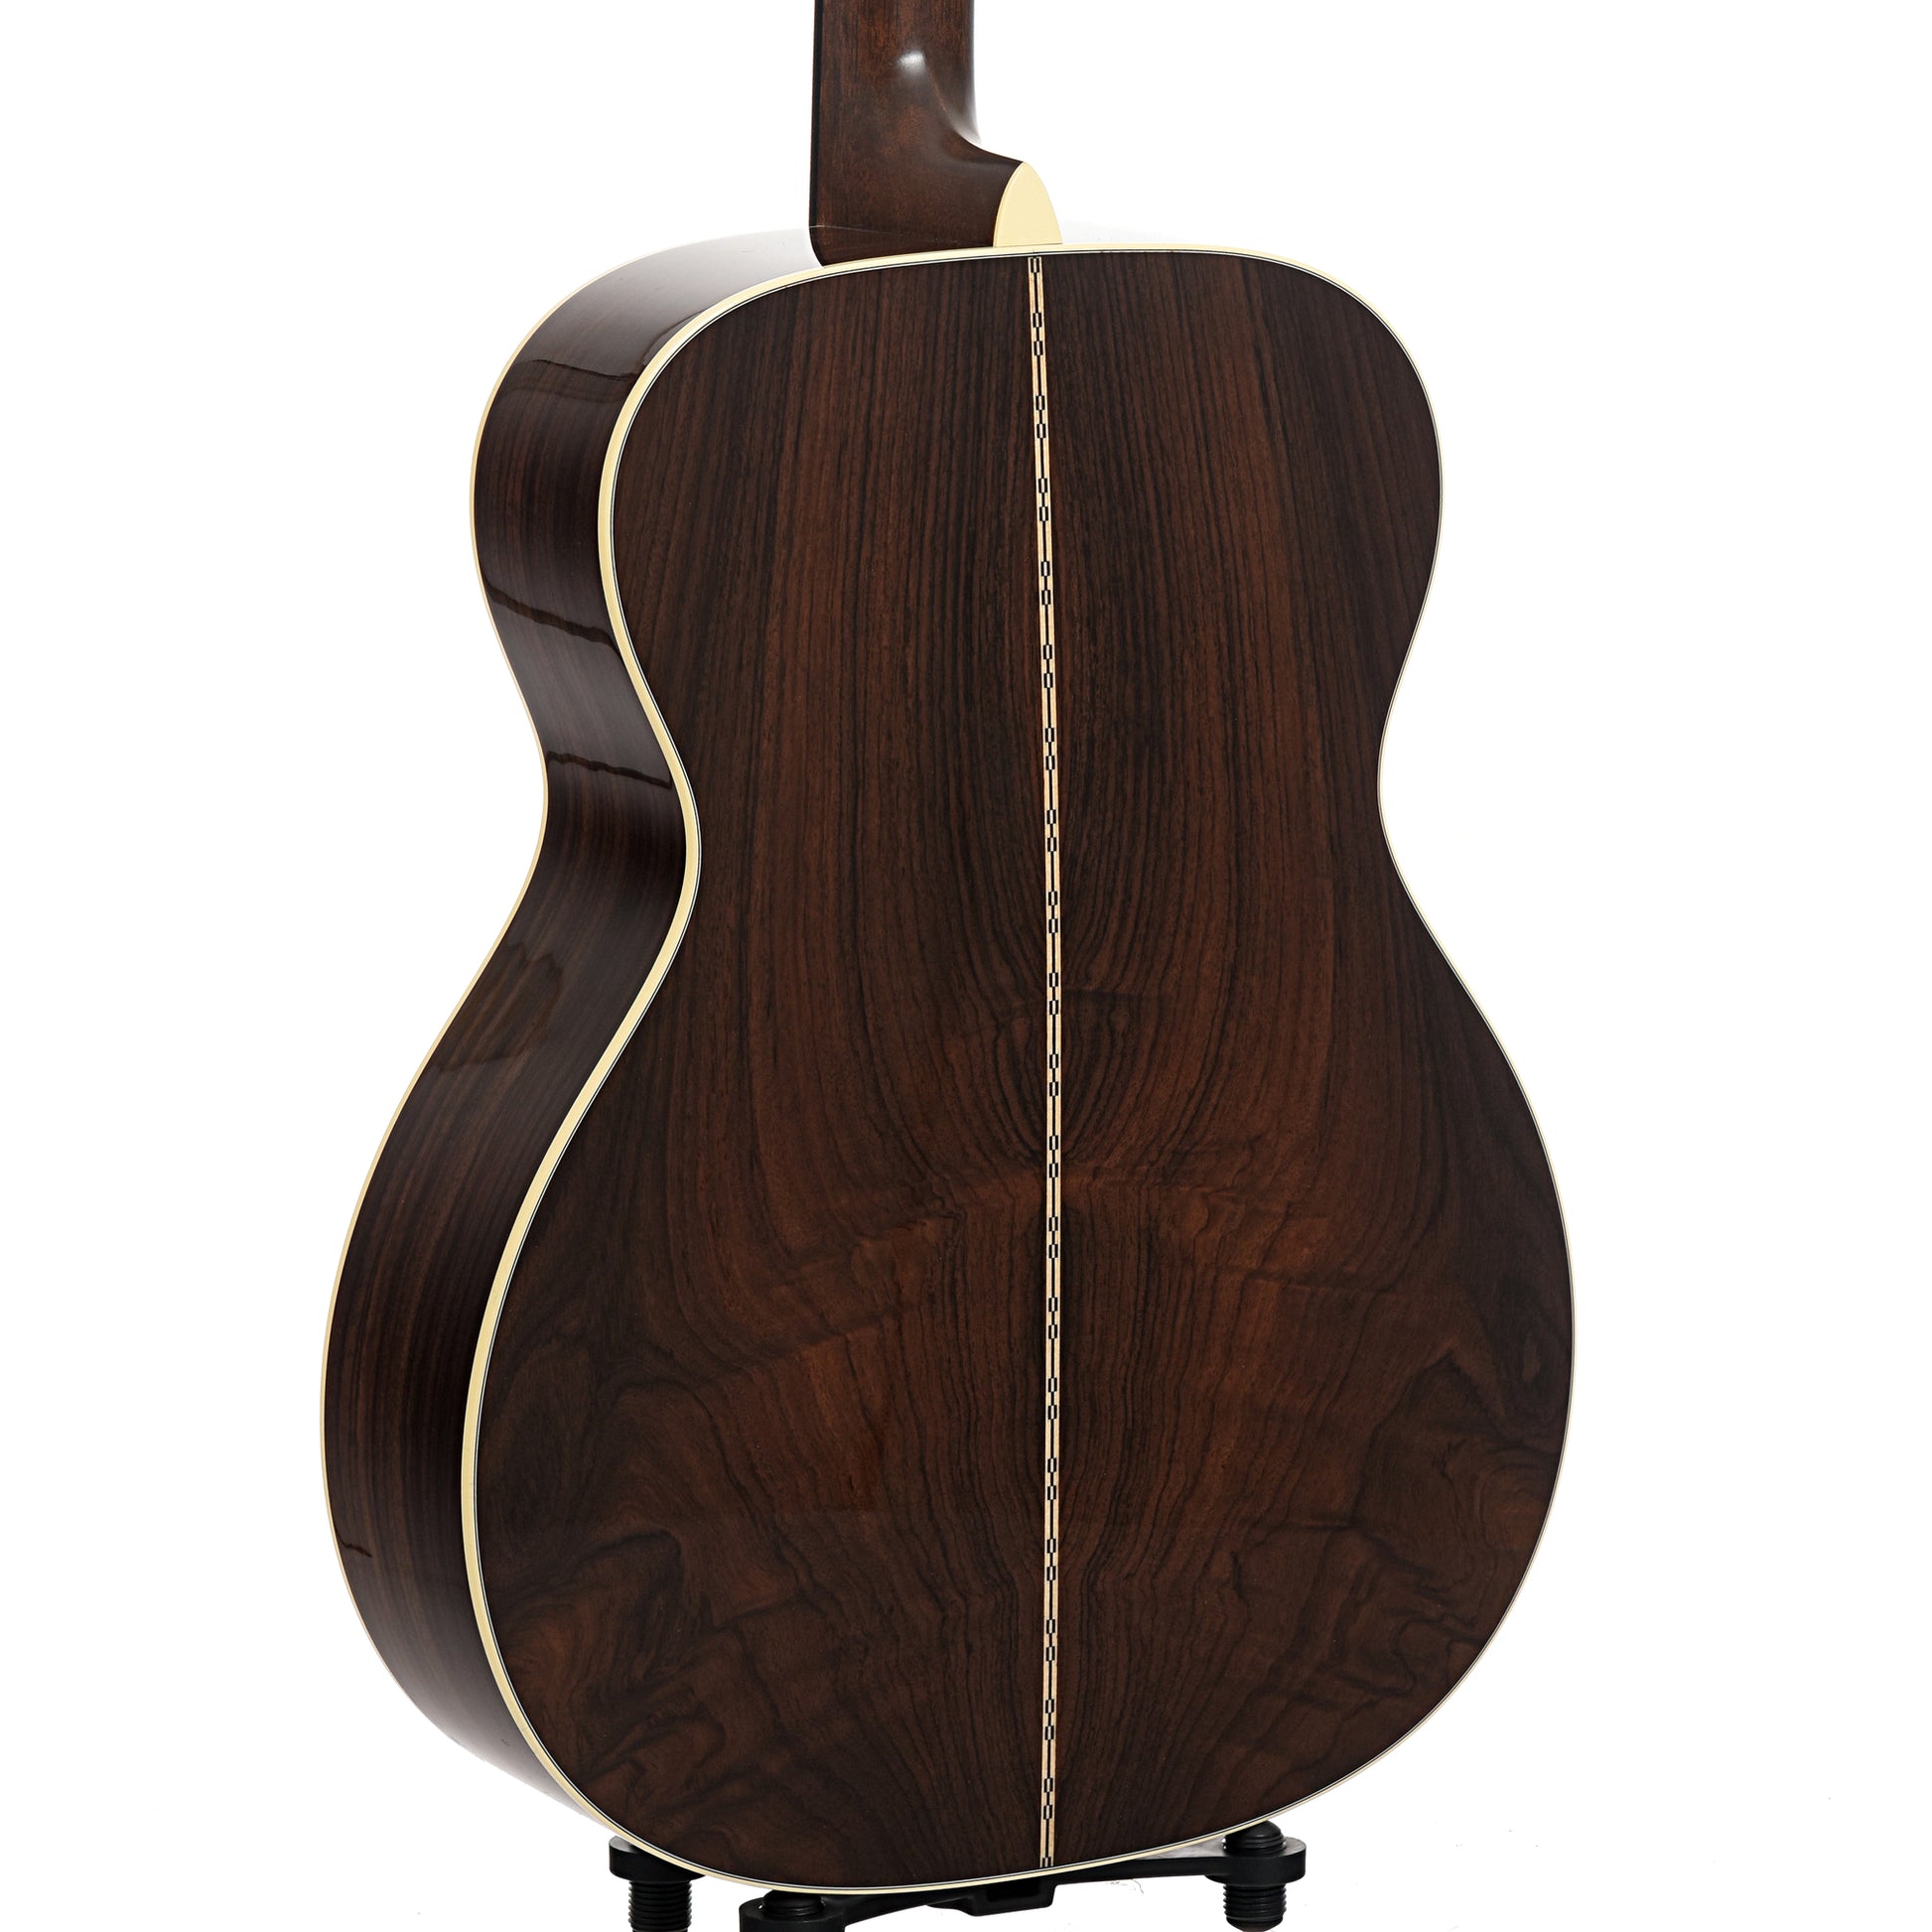 Back and side of Martin Custom 28-Style 000 Guitar & Case, Wild Grain Rosewood & Adirondack Spruce